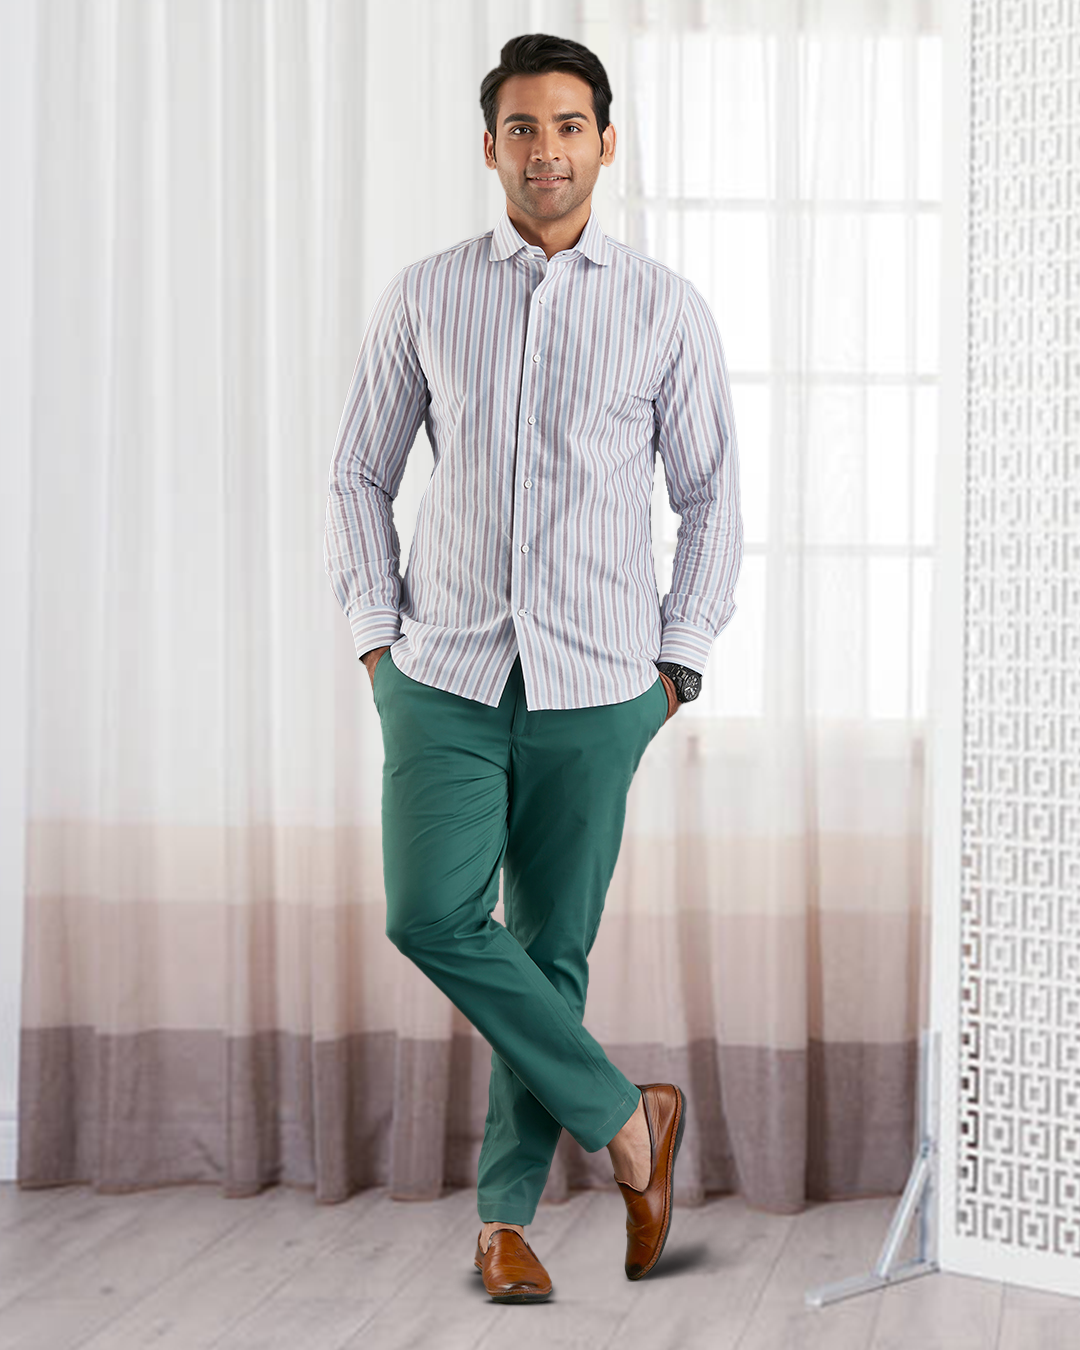 Model wearing the custom oxford shirt for men by Luxire in white with maroon and blue stripes hands in pockets